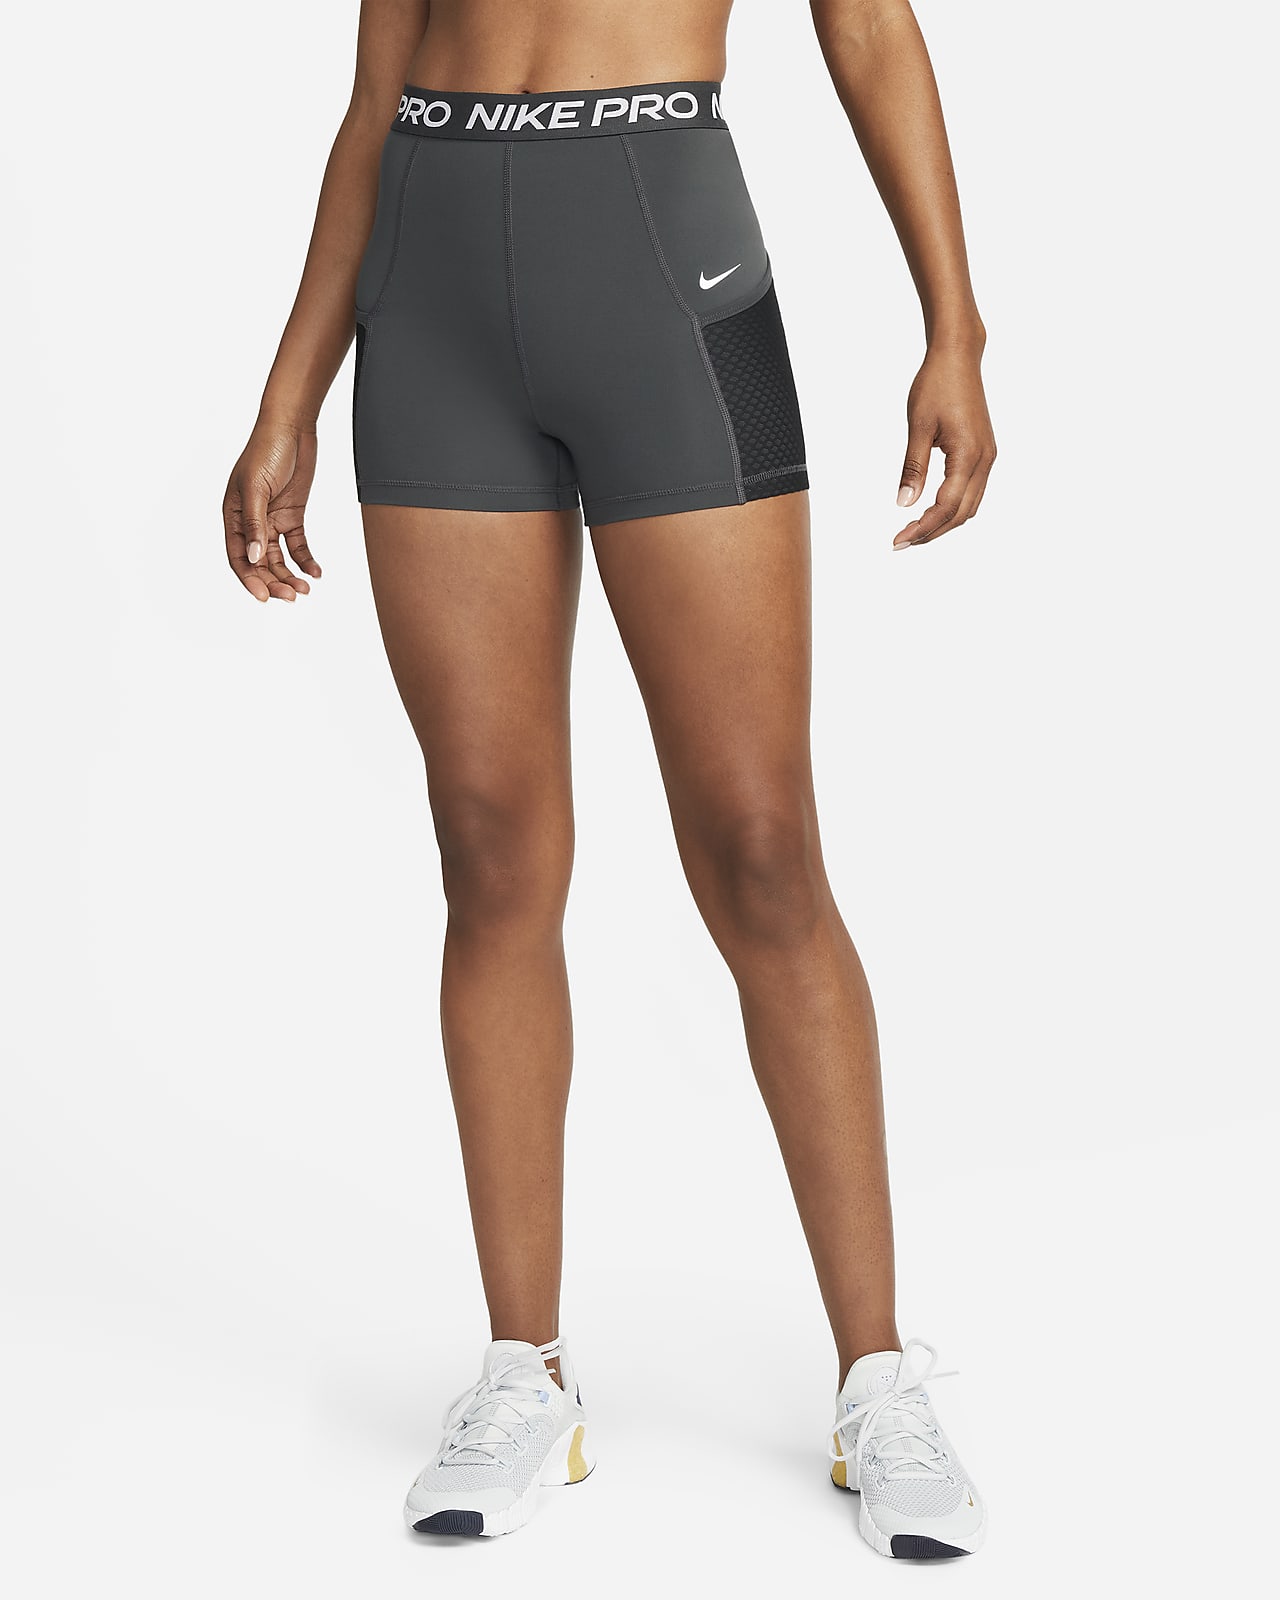 tang religion labyrint Nike Pro Women's High-Waisted 3" Training Shorts with Pockets. Nike.com